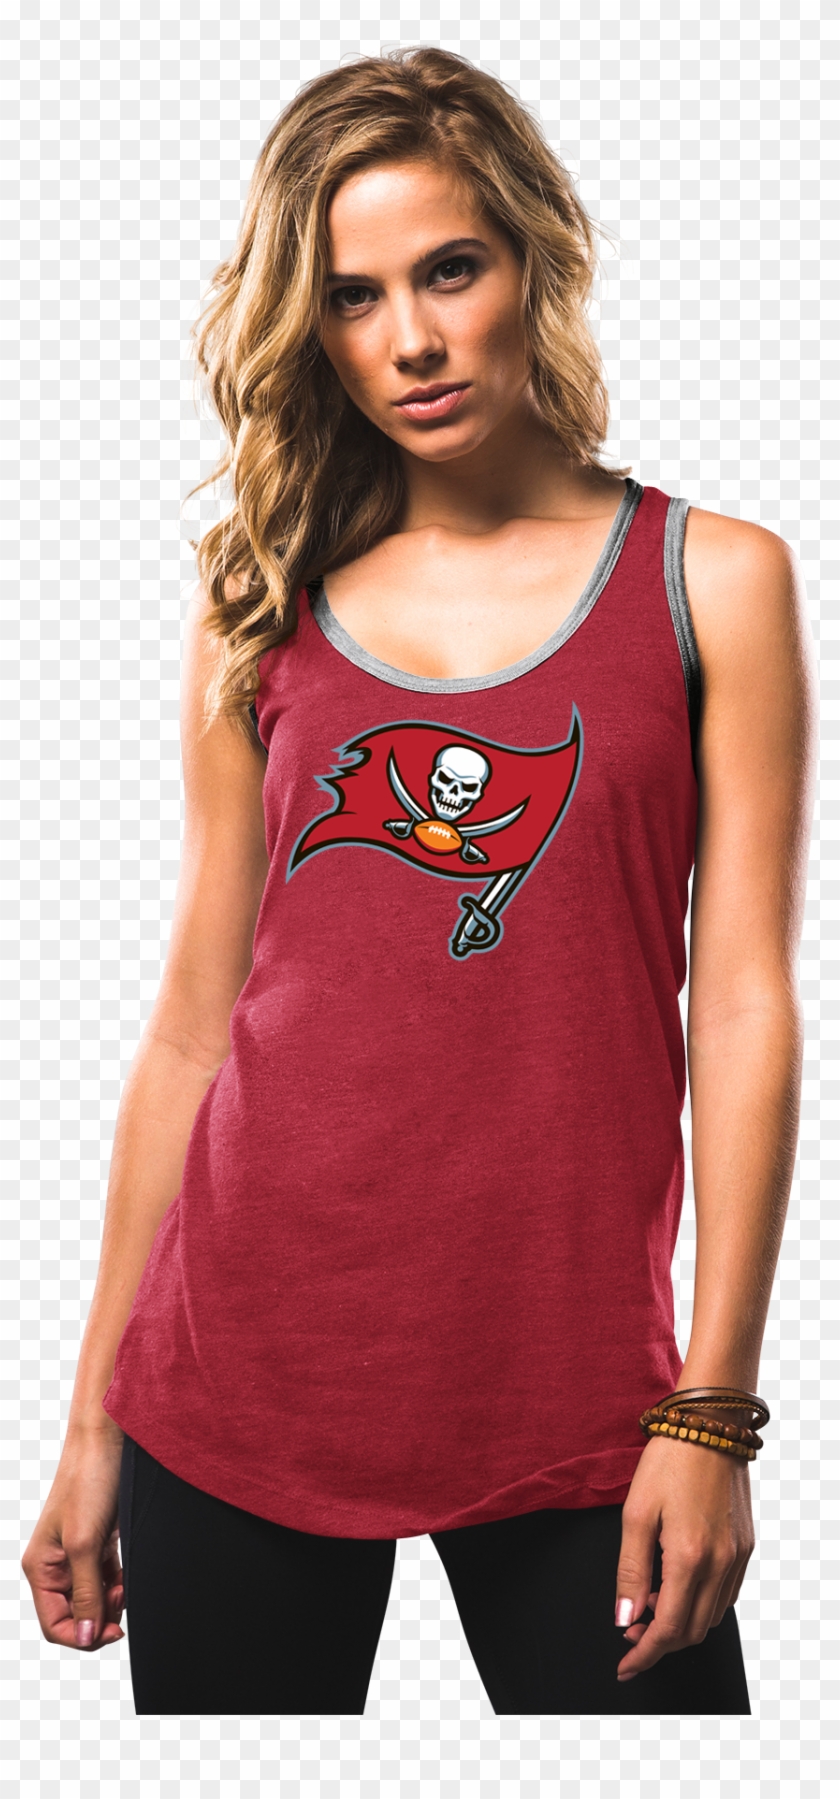 Majestic Buccaneers Women's Heather Red Tested Tank - Tampa Bay Buccaneers Clipart #5762316